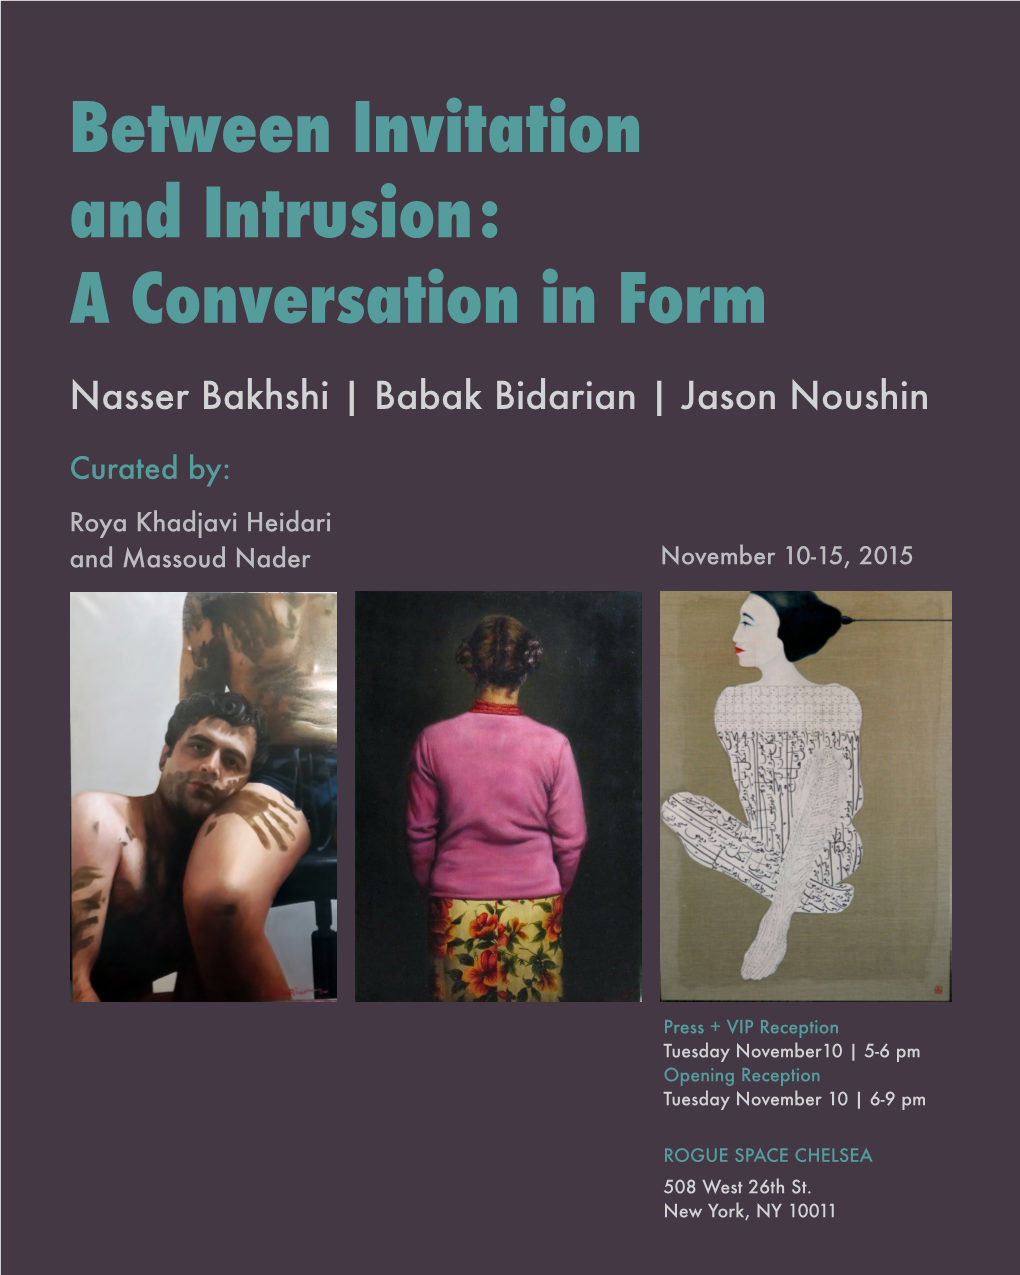 Between Invitation and Intrusion: a Conversation in Form